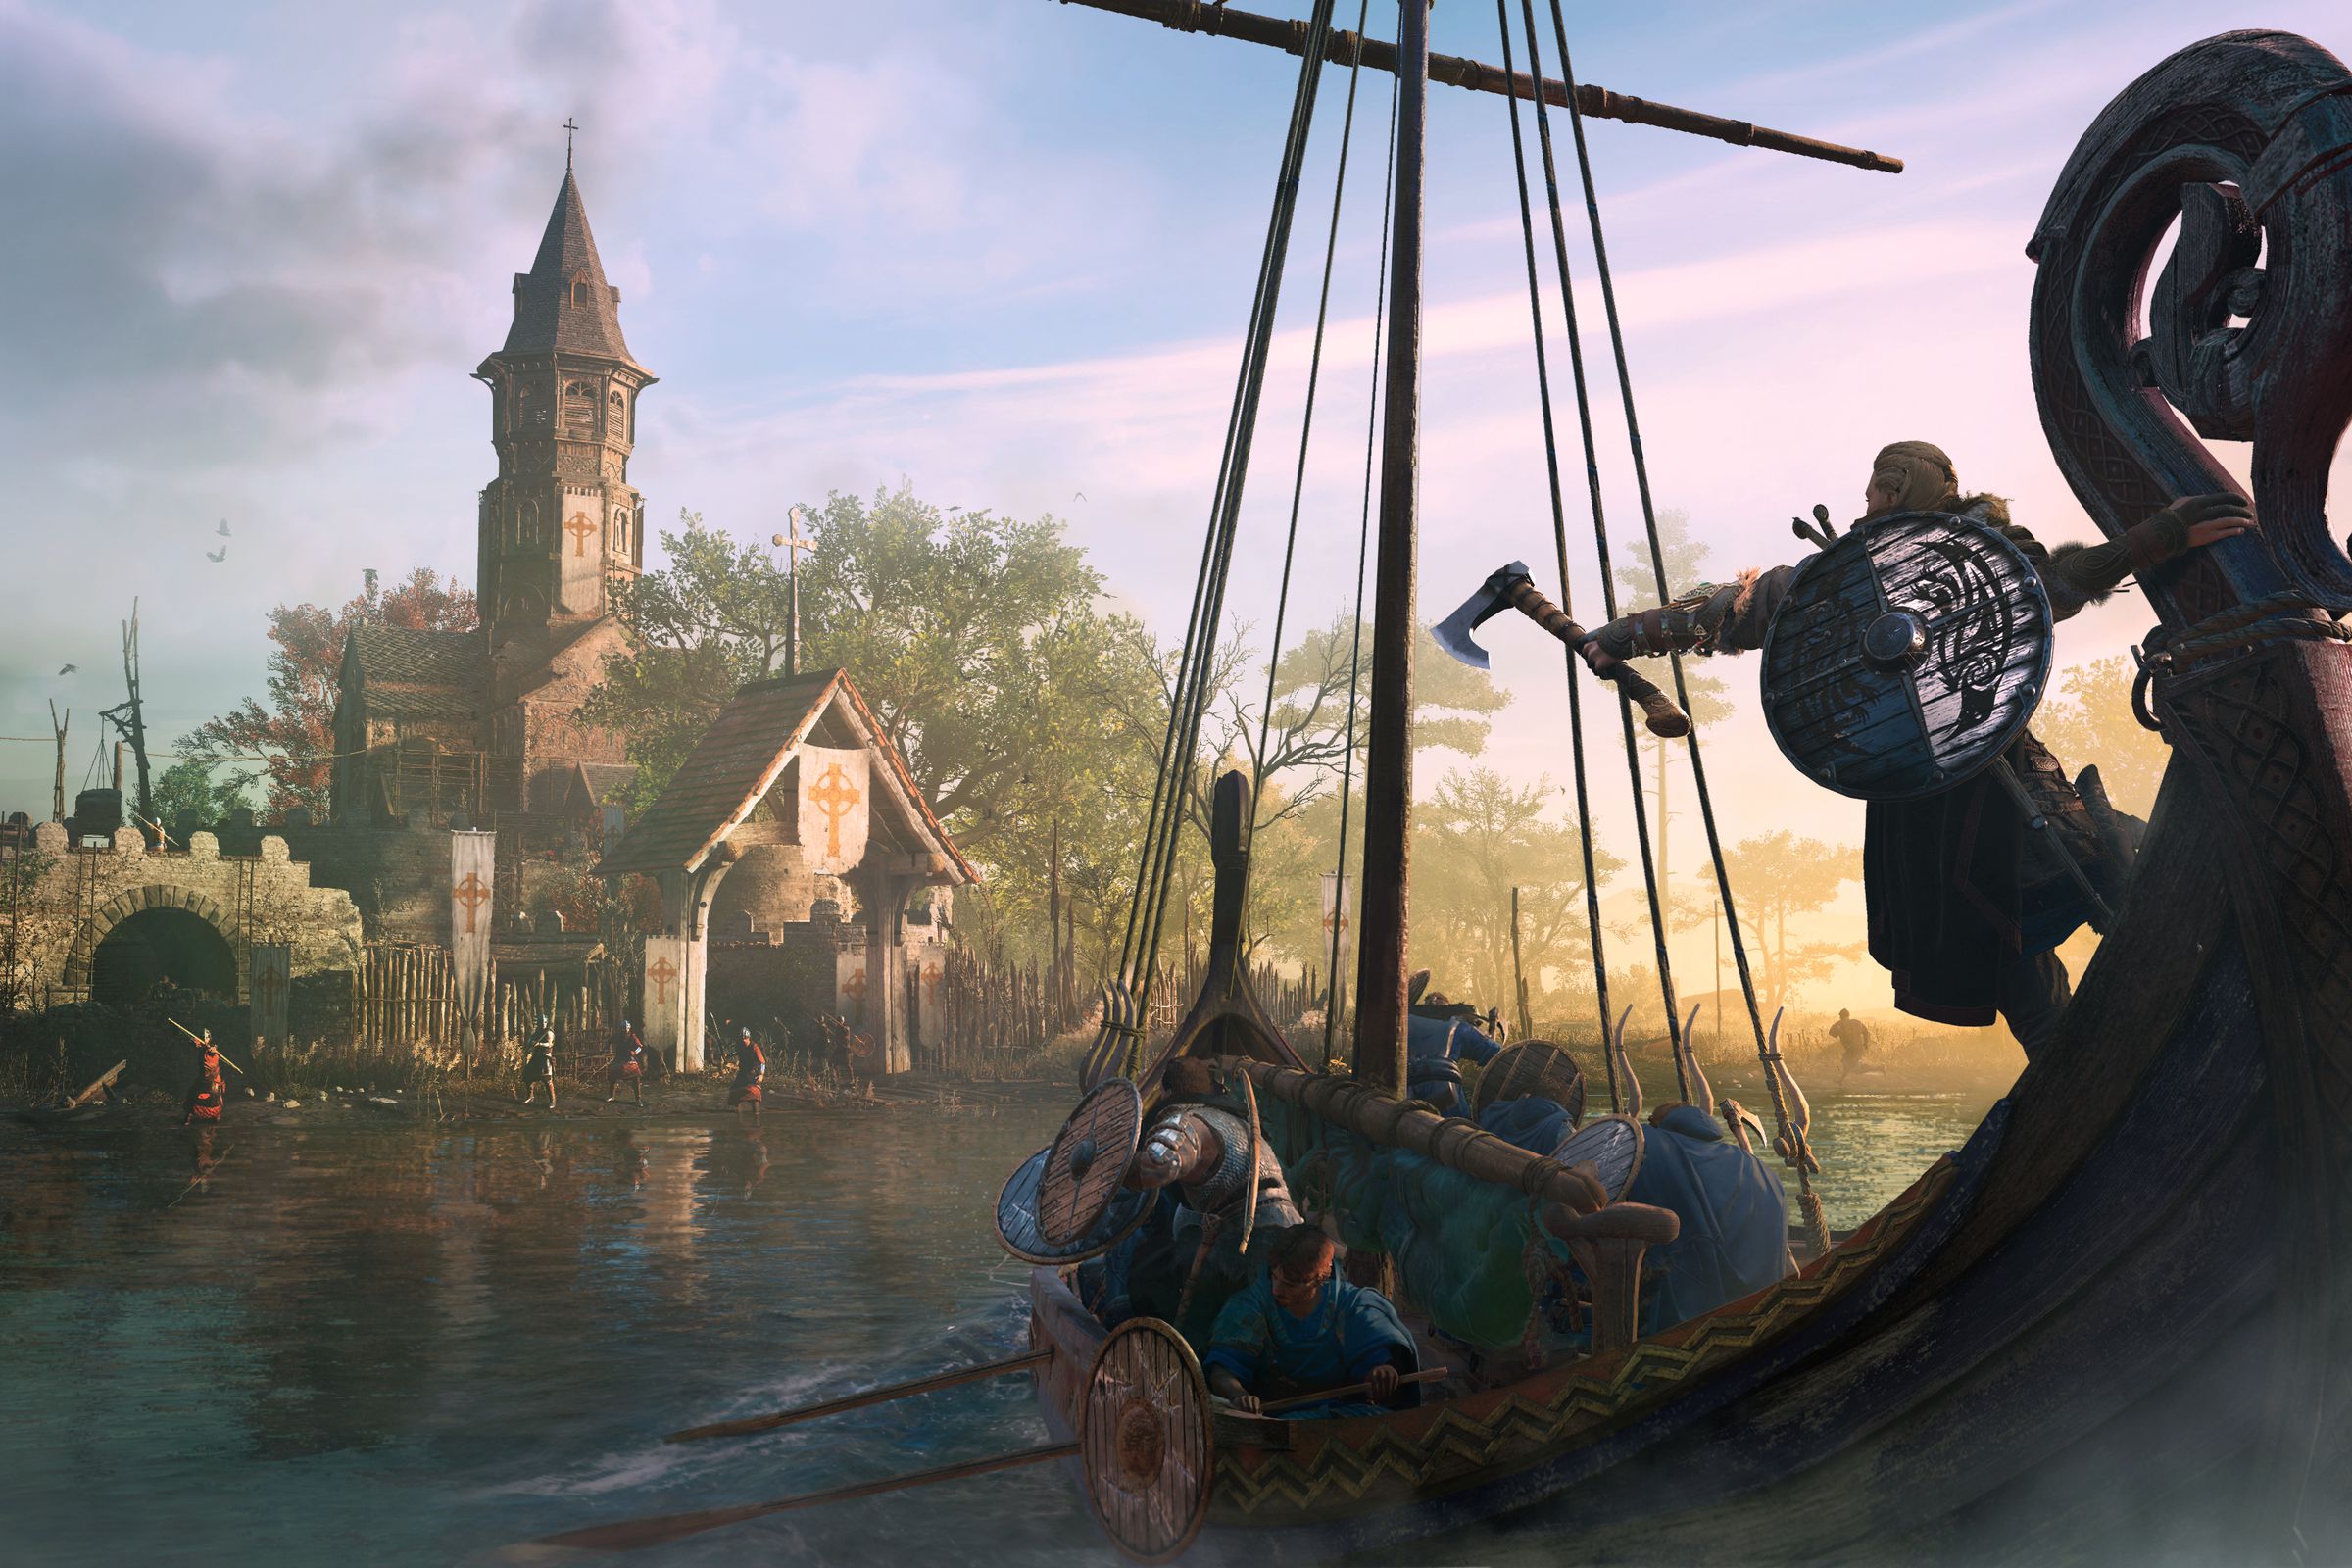 An image showing the Assassin’s Creed Valhalla game